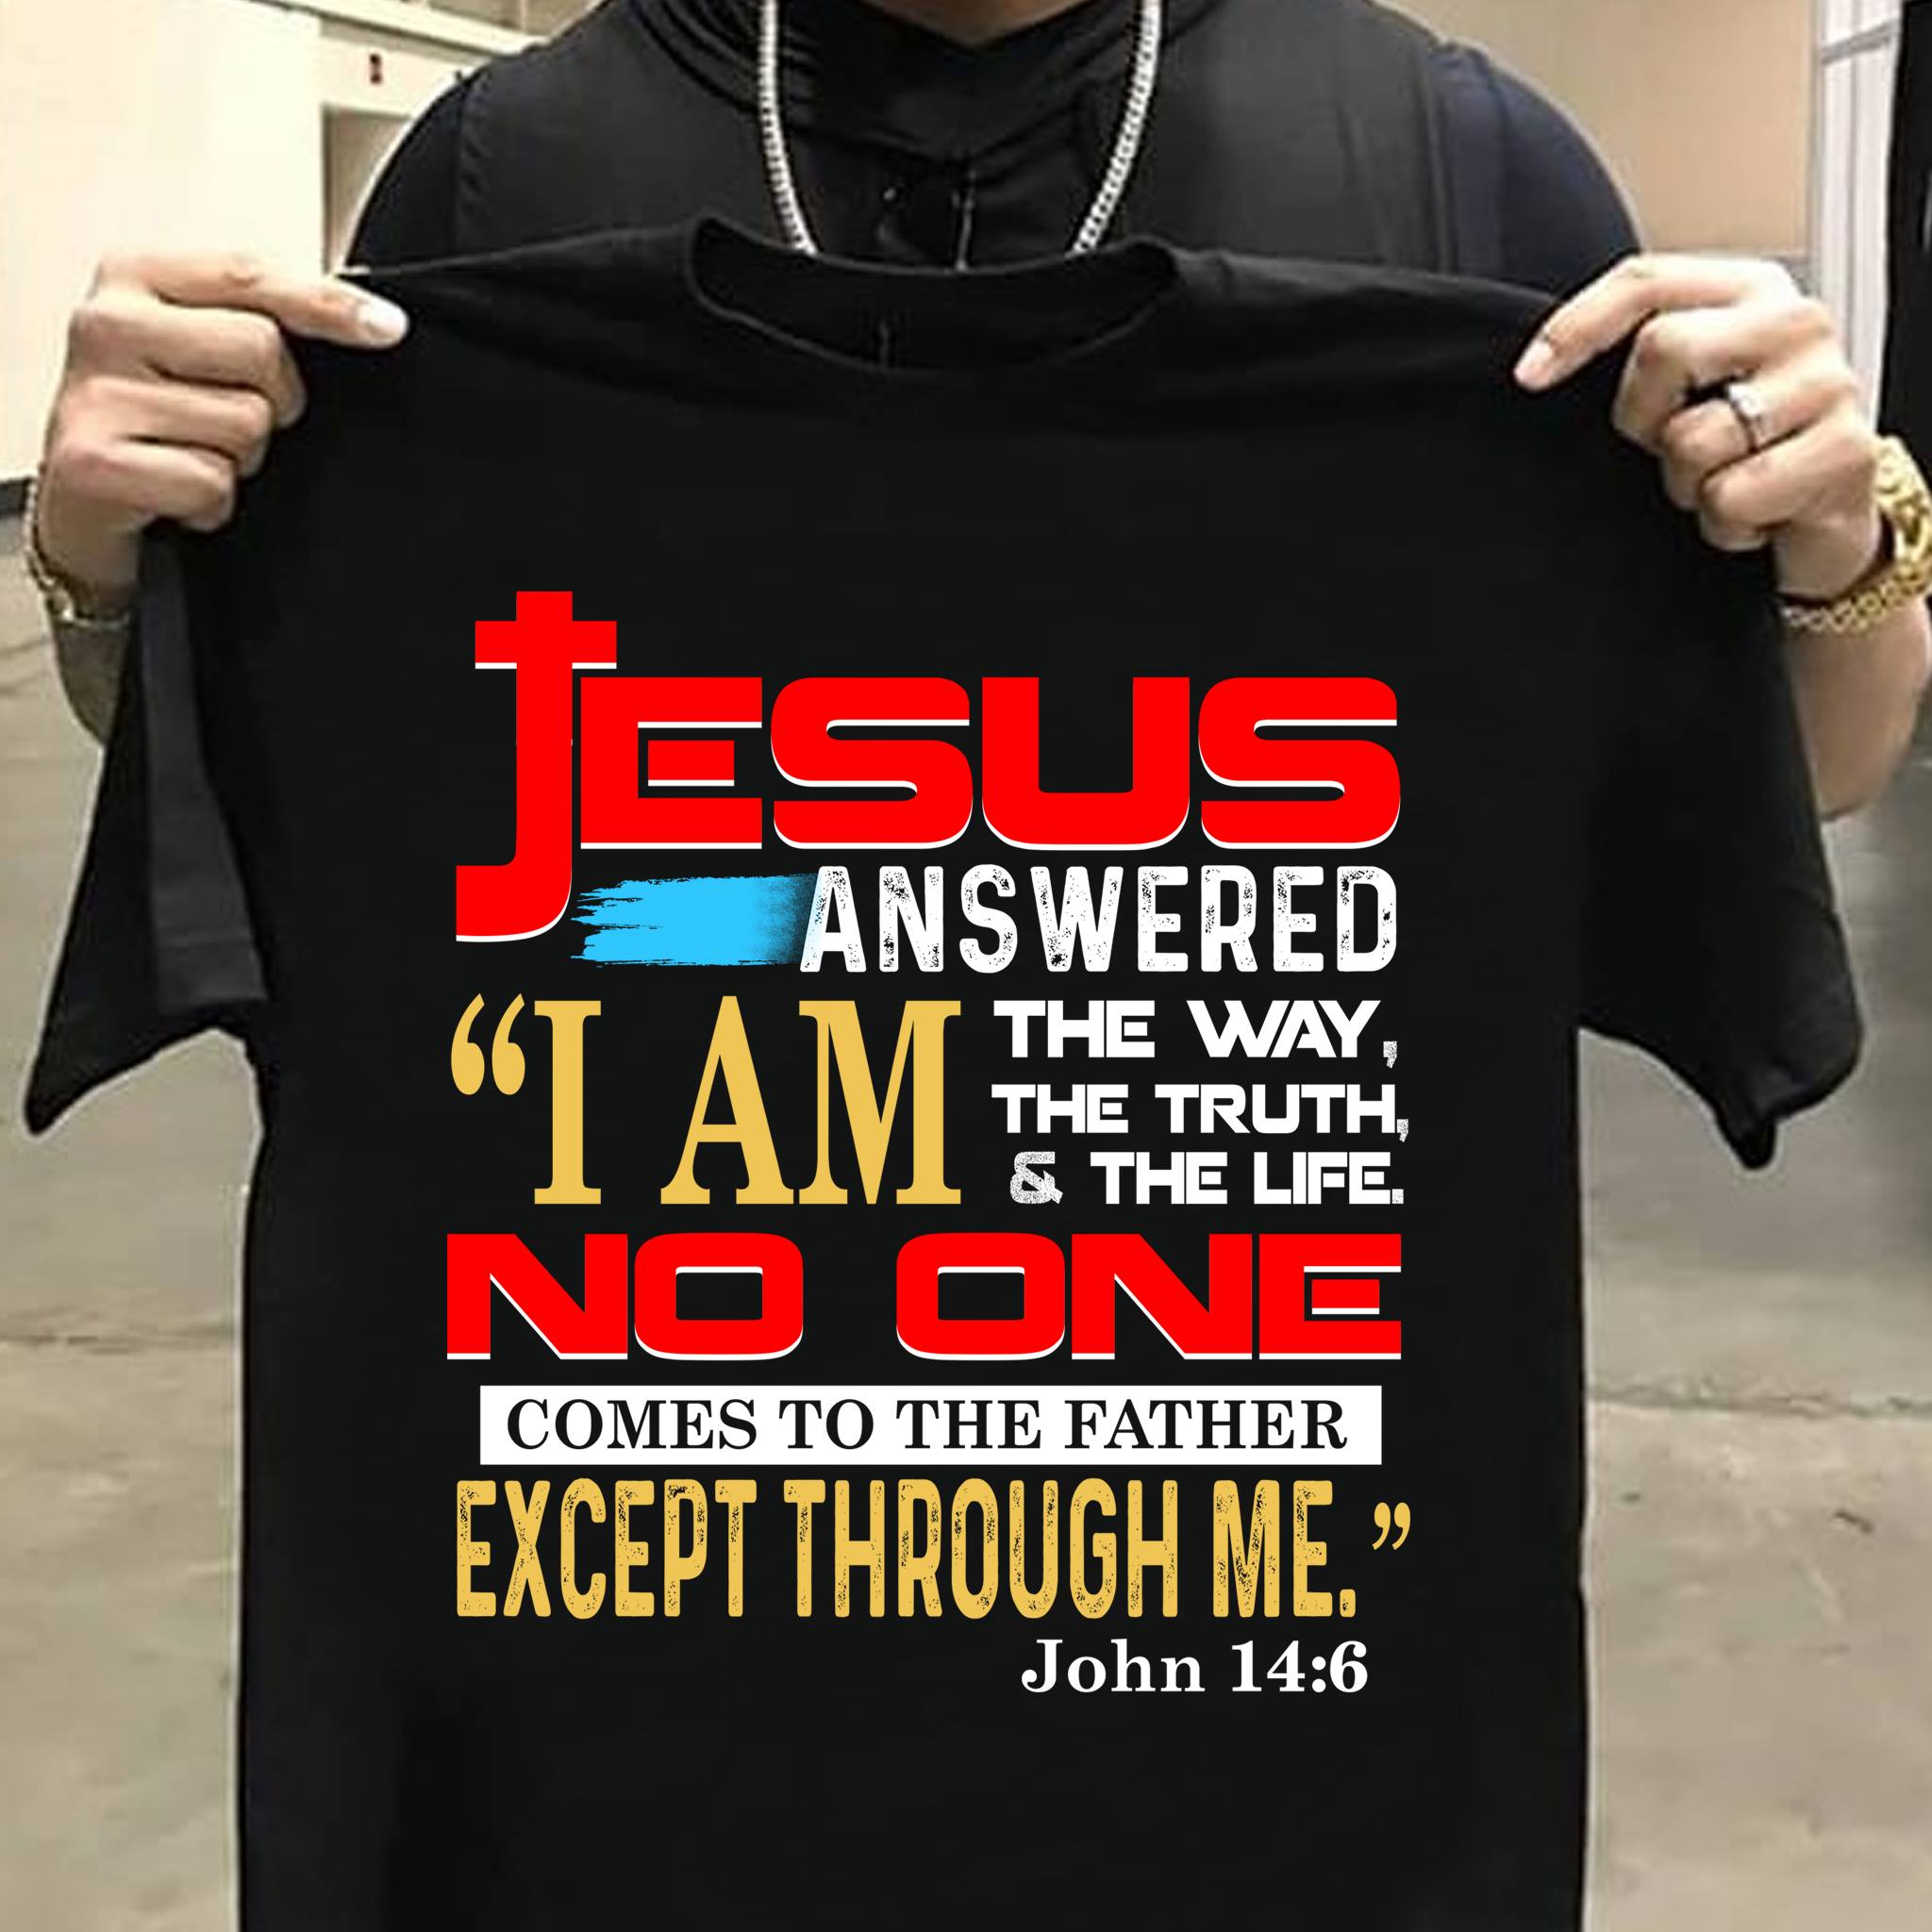 Jesus answered I am the way, the truth and the life no one comes to the father